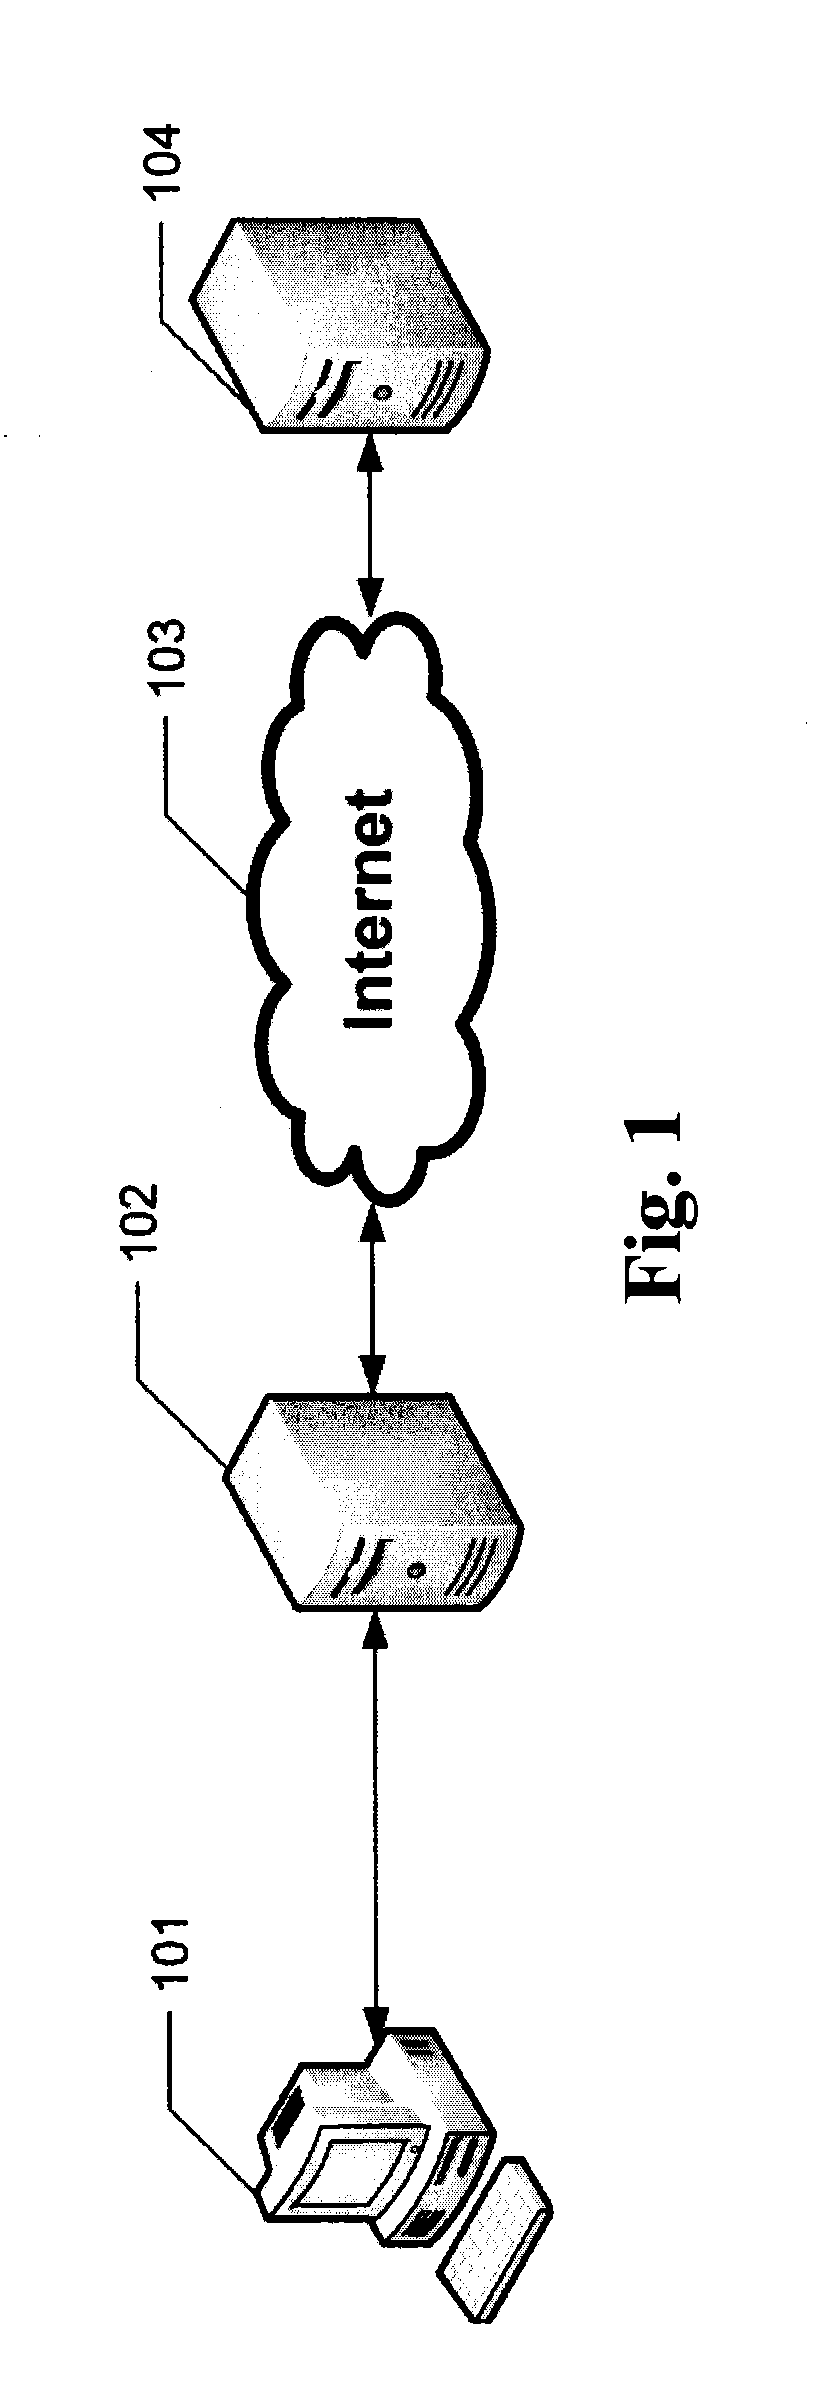 System and Method for Server-Based Antivirus Scan of Data Downloaded From a Network